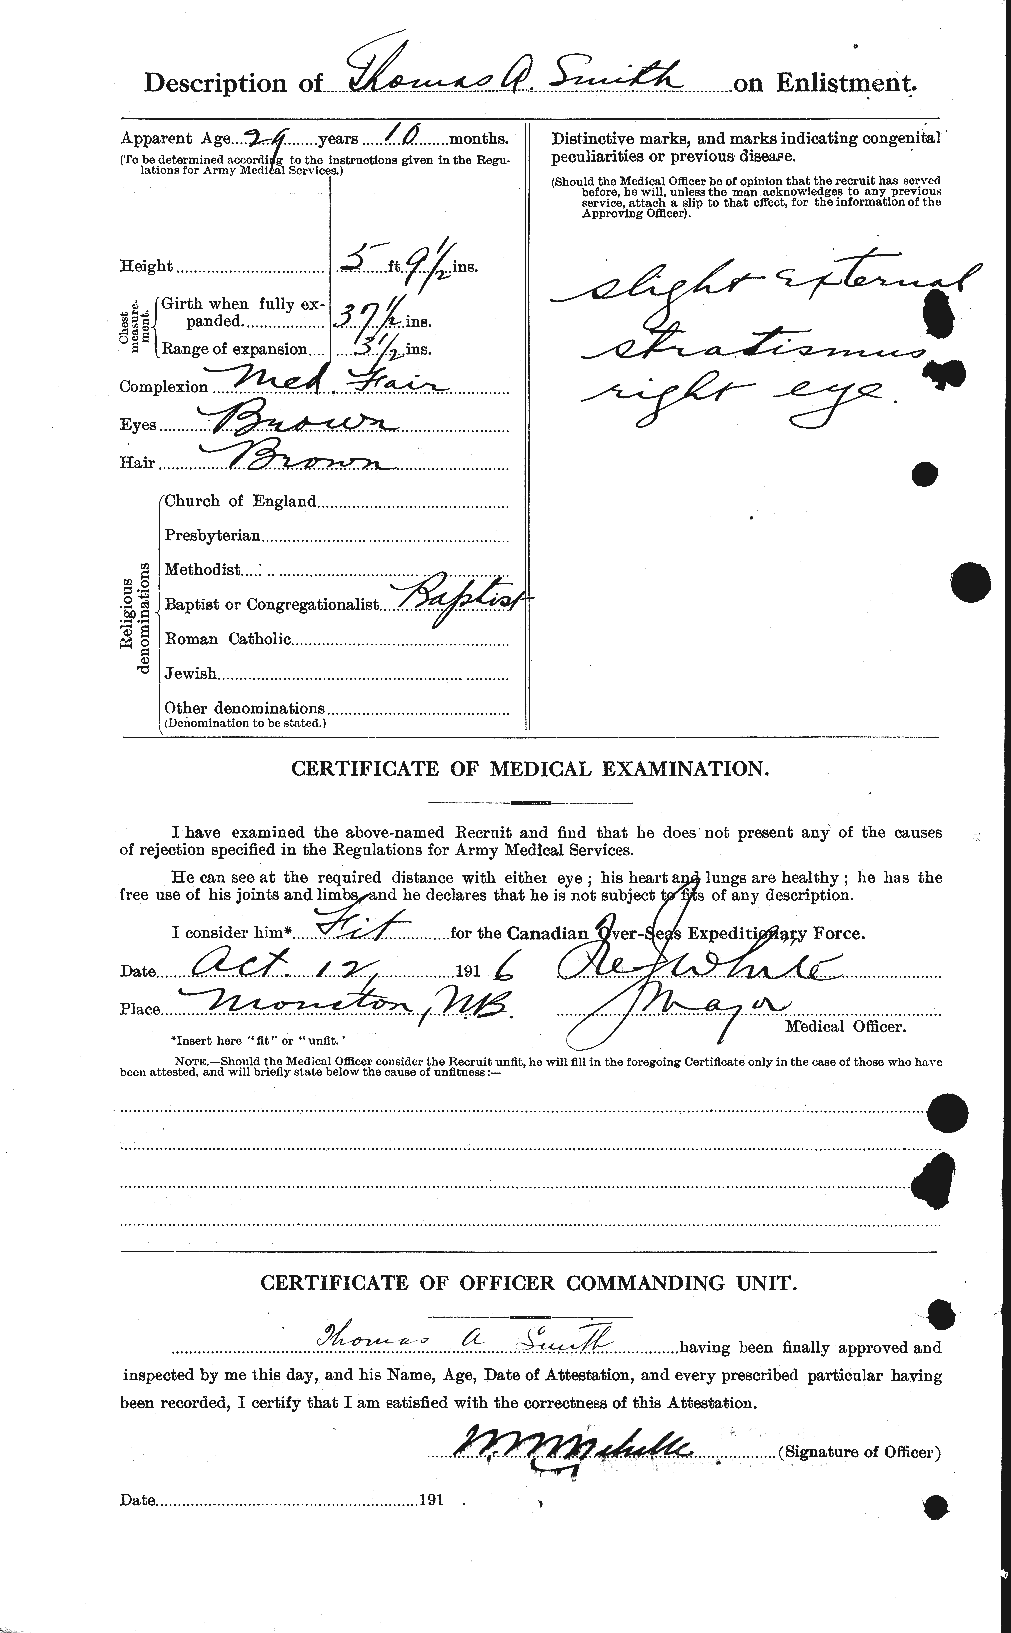 Personnel Records of the First World War - CEF 106675b